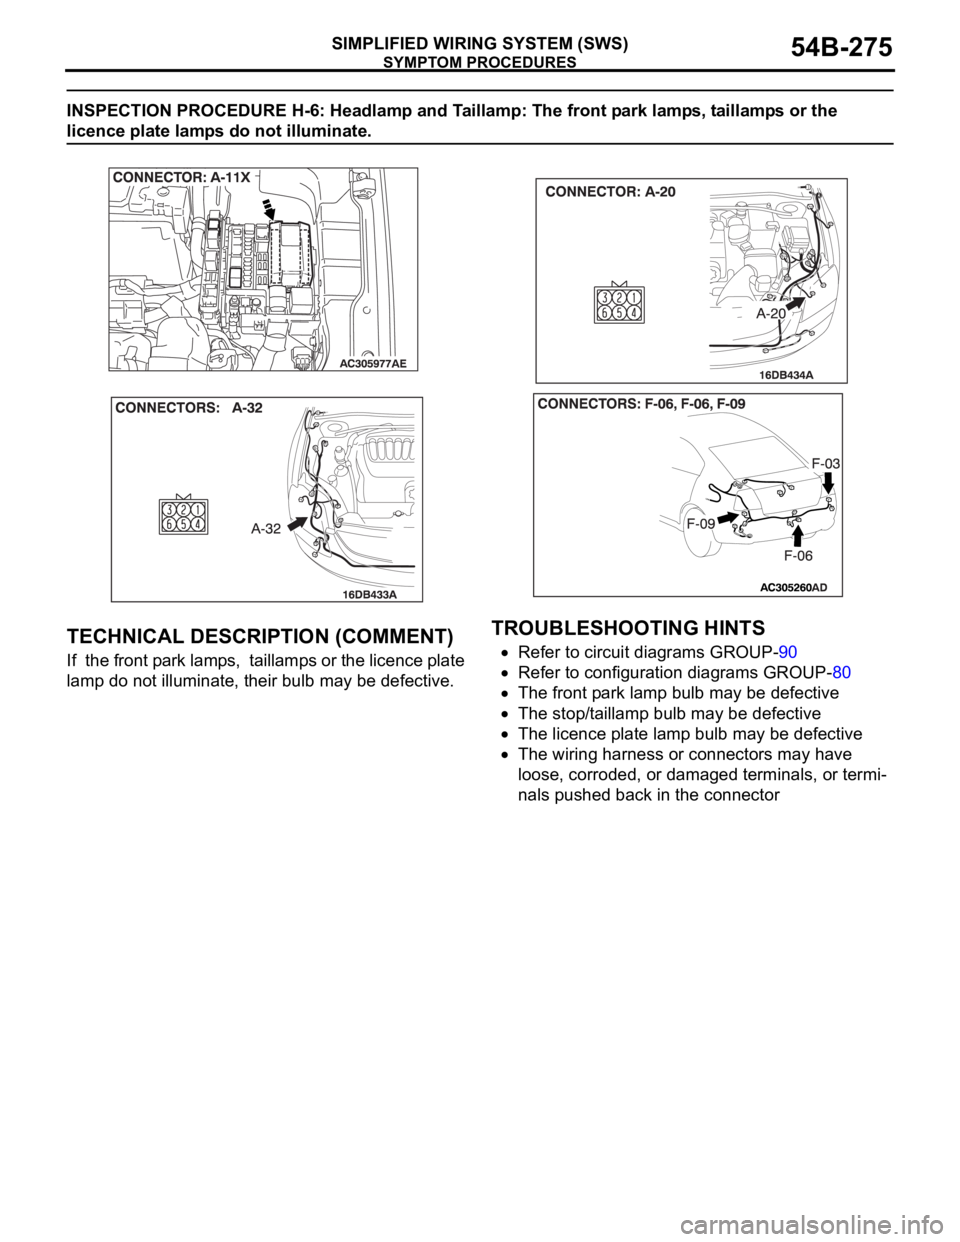 MITSUBISHI 380 2005  Workshop Manual SYMPTOM PROCEDURES
SIMPLIFIED WIRING SYSTEM (SWS)54B-275
INSPECTION PROCEDURE H-6: Headlamp and Taillamp: The front park lamps, taillamps or the 
licence plate lamps do not illuminate.
.
TECHNICAL DES